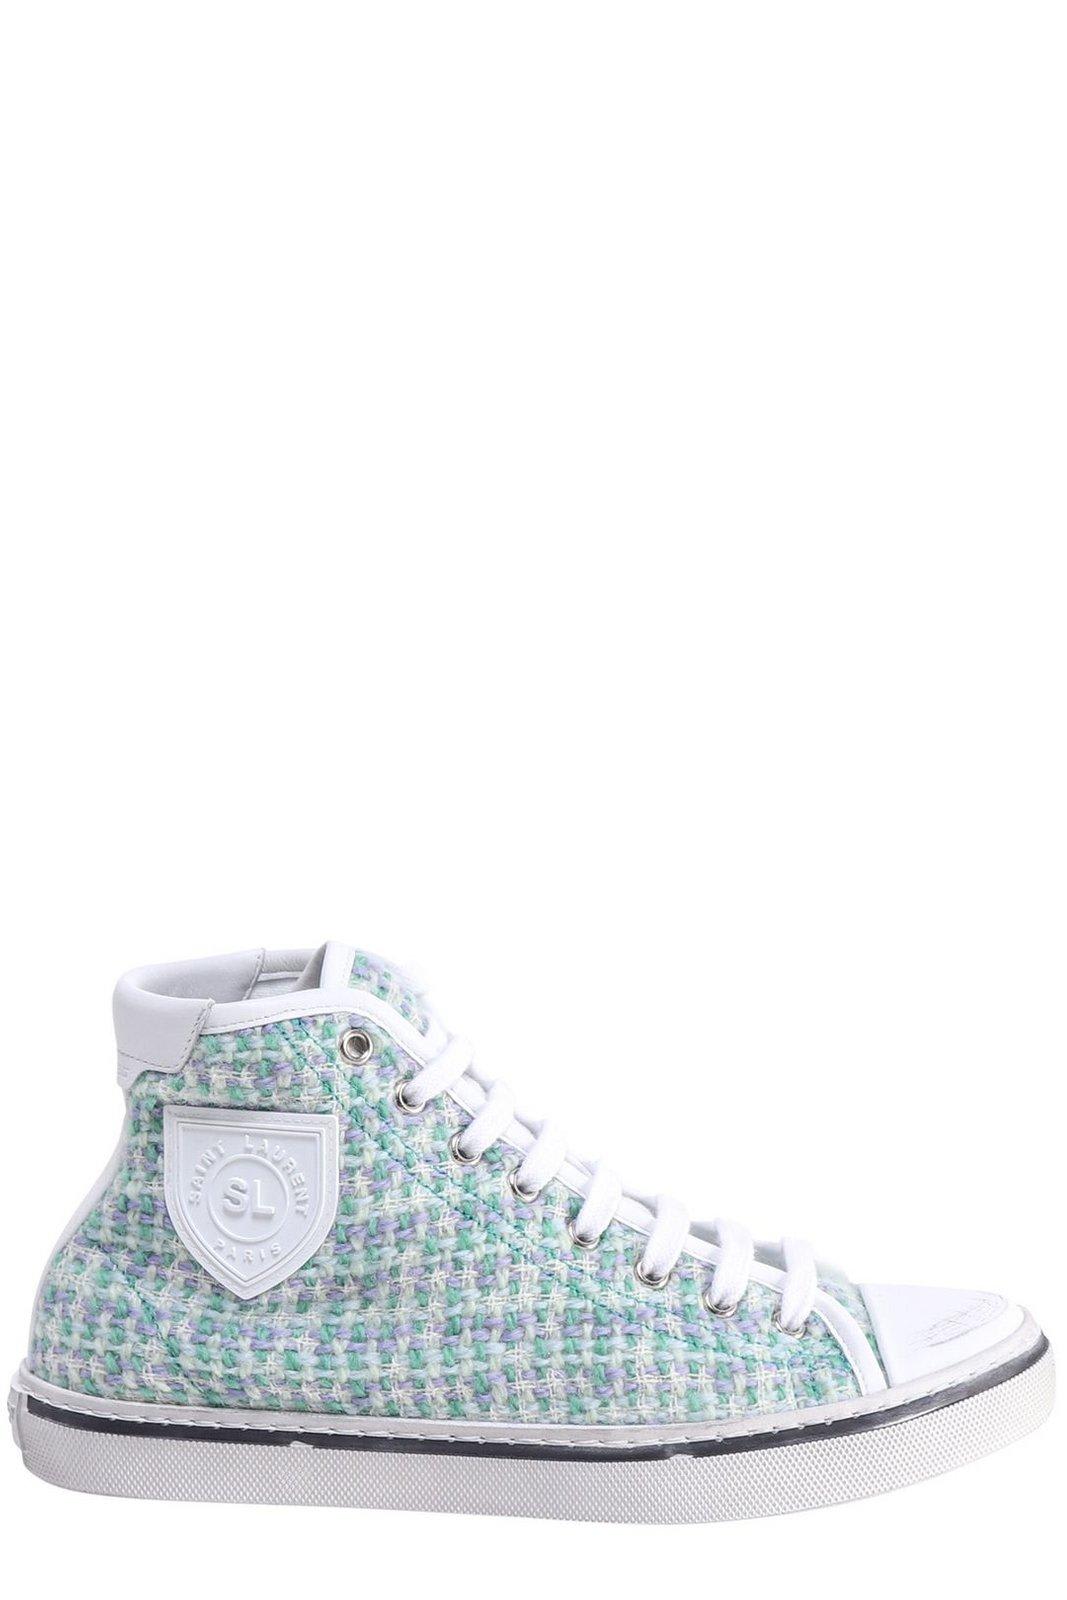 Bedford Lace-up Sneakers